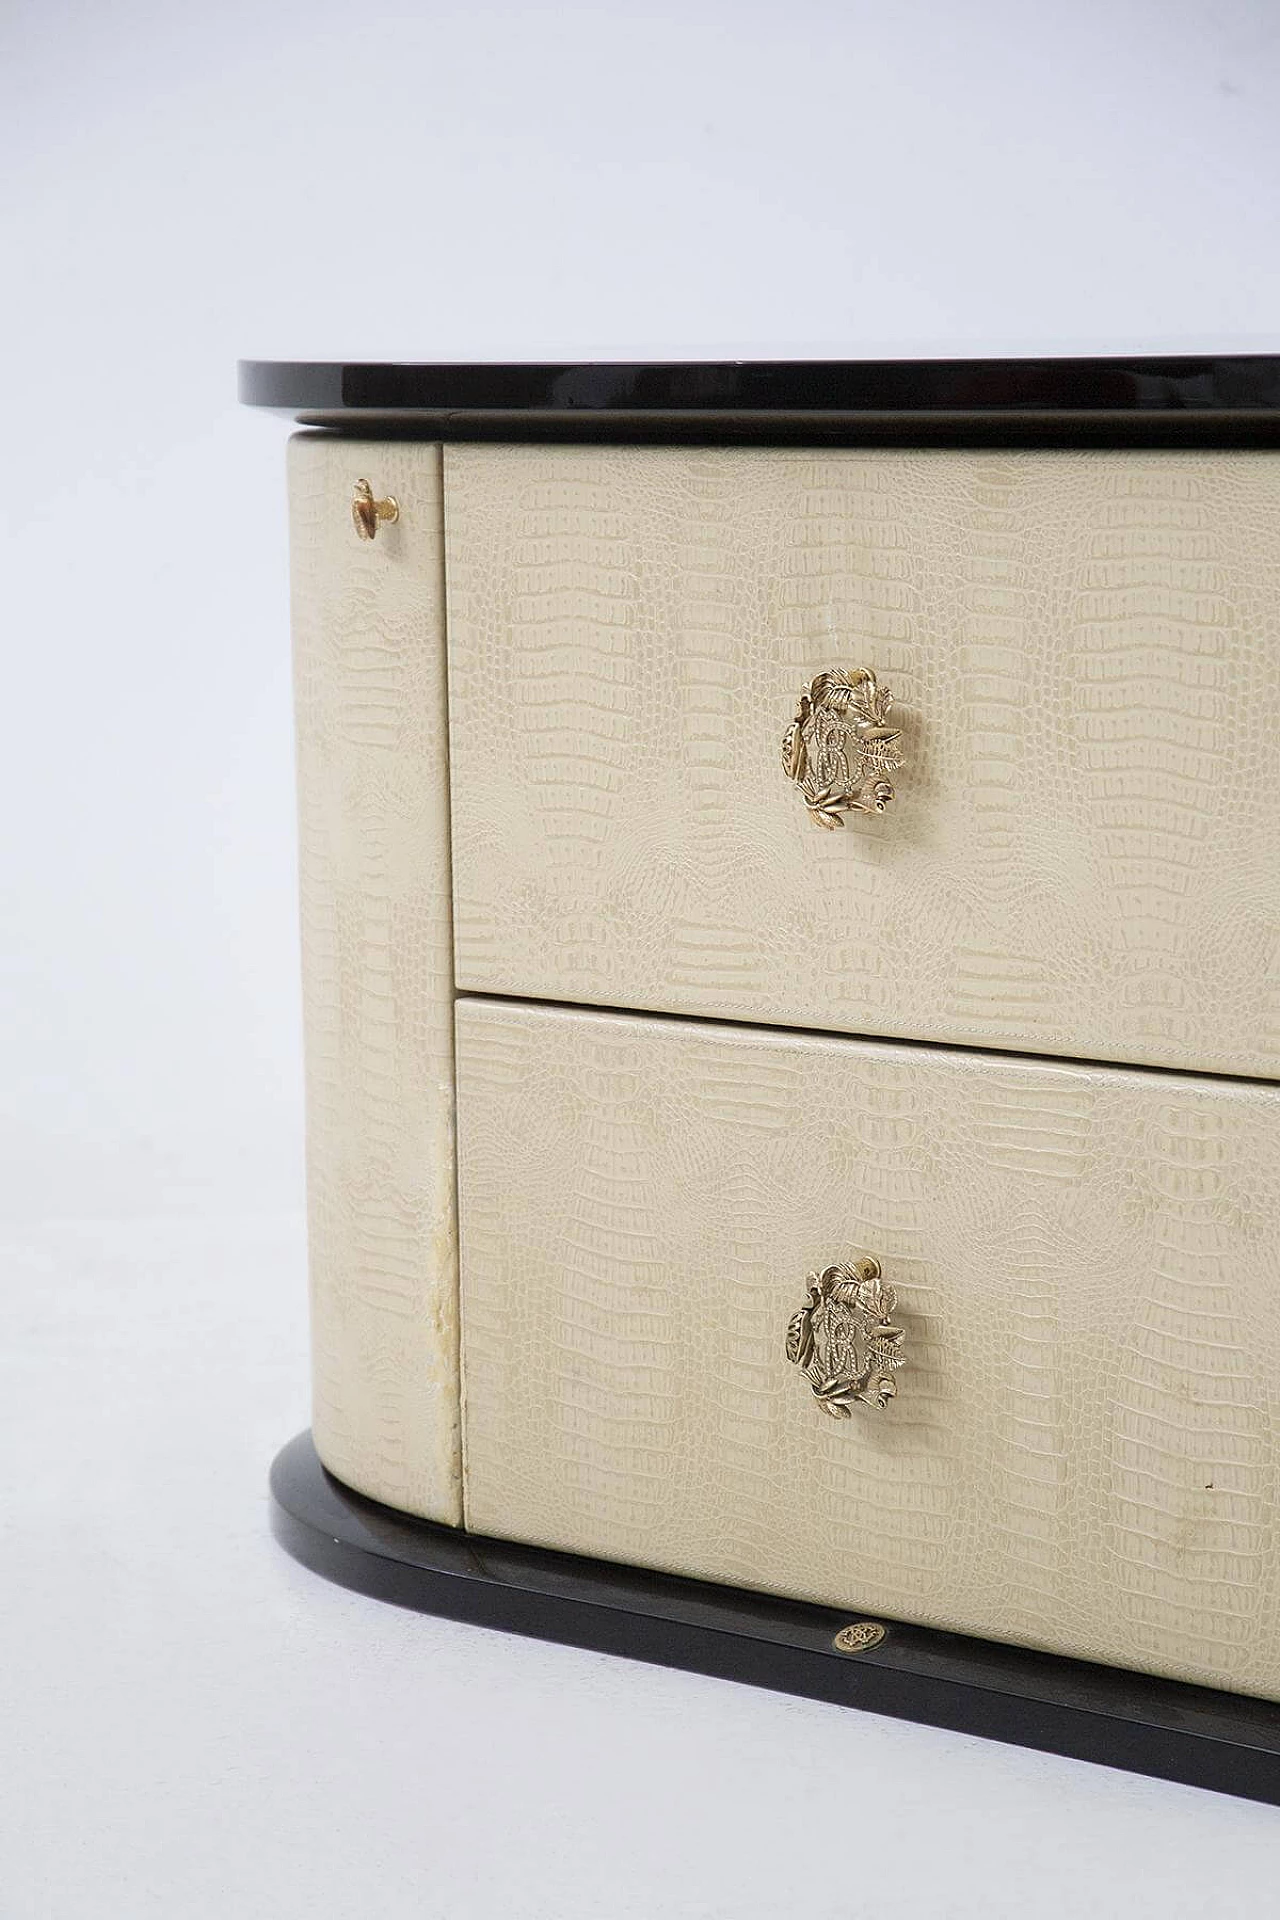 Roberto Cavalli chest of drawers in imitation reptile skin, 1990s 1466227